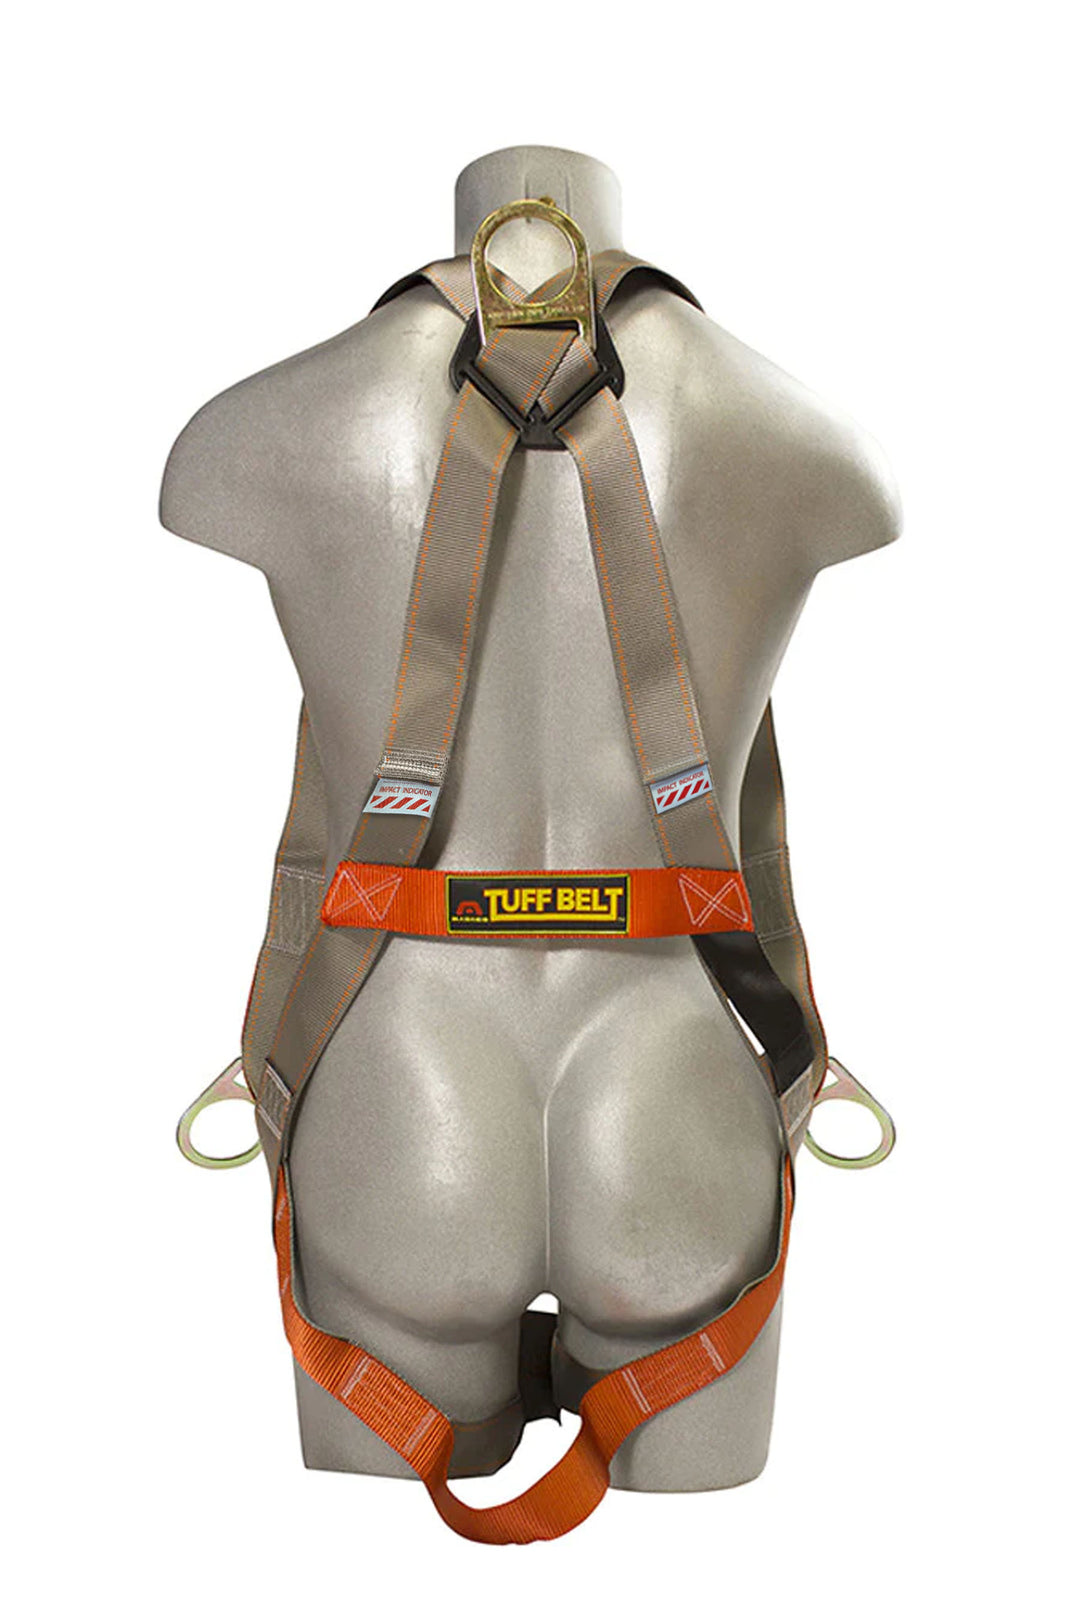 Feather-Lite 3 Point Safer Full Body Harness / H-TB201D